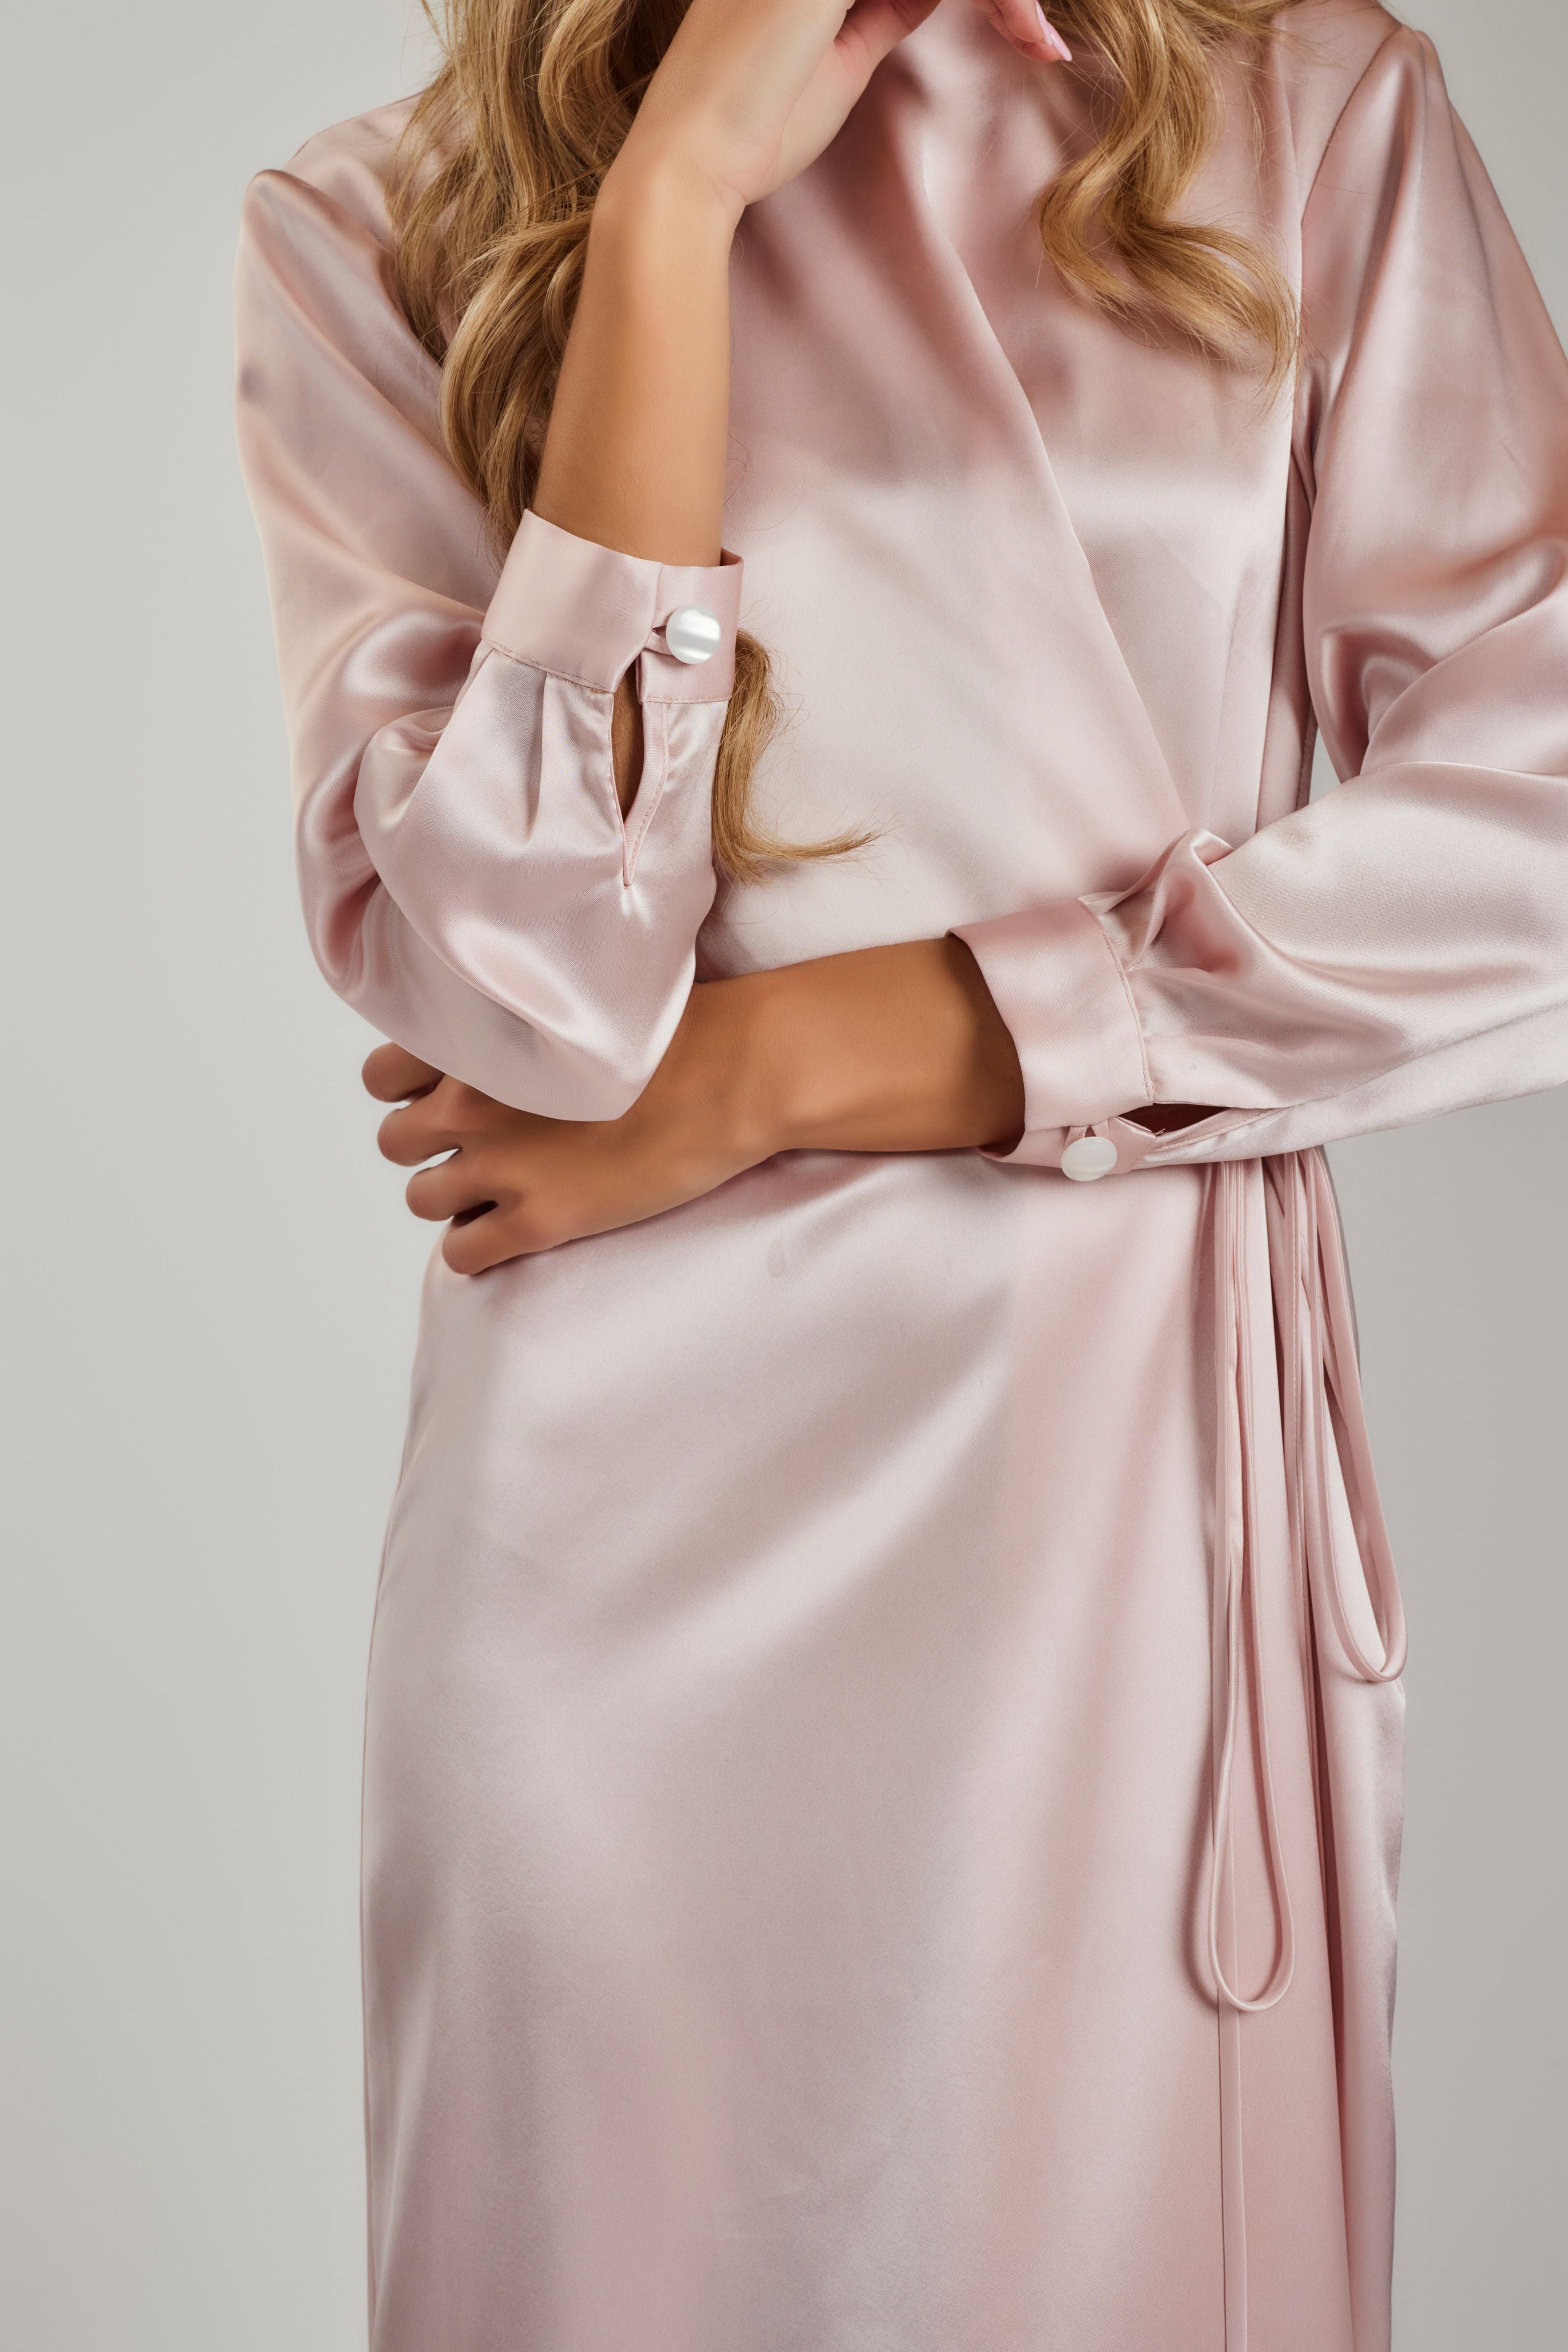 Satin Relaxed Fit Maxi Dress - Ice Pink - Olivvi World